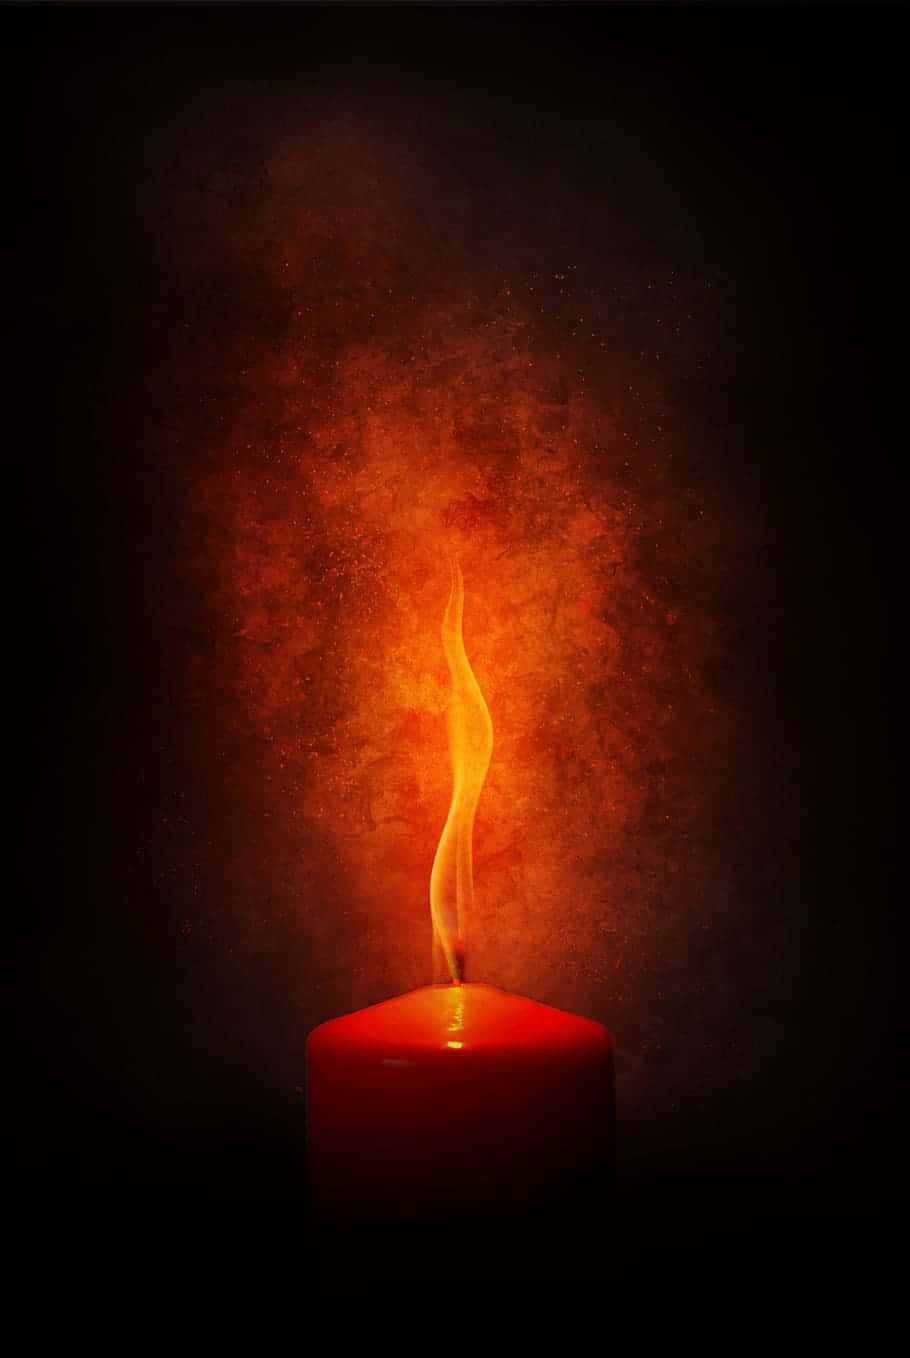 A Red Candle On A Dark Background